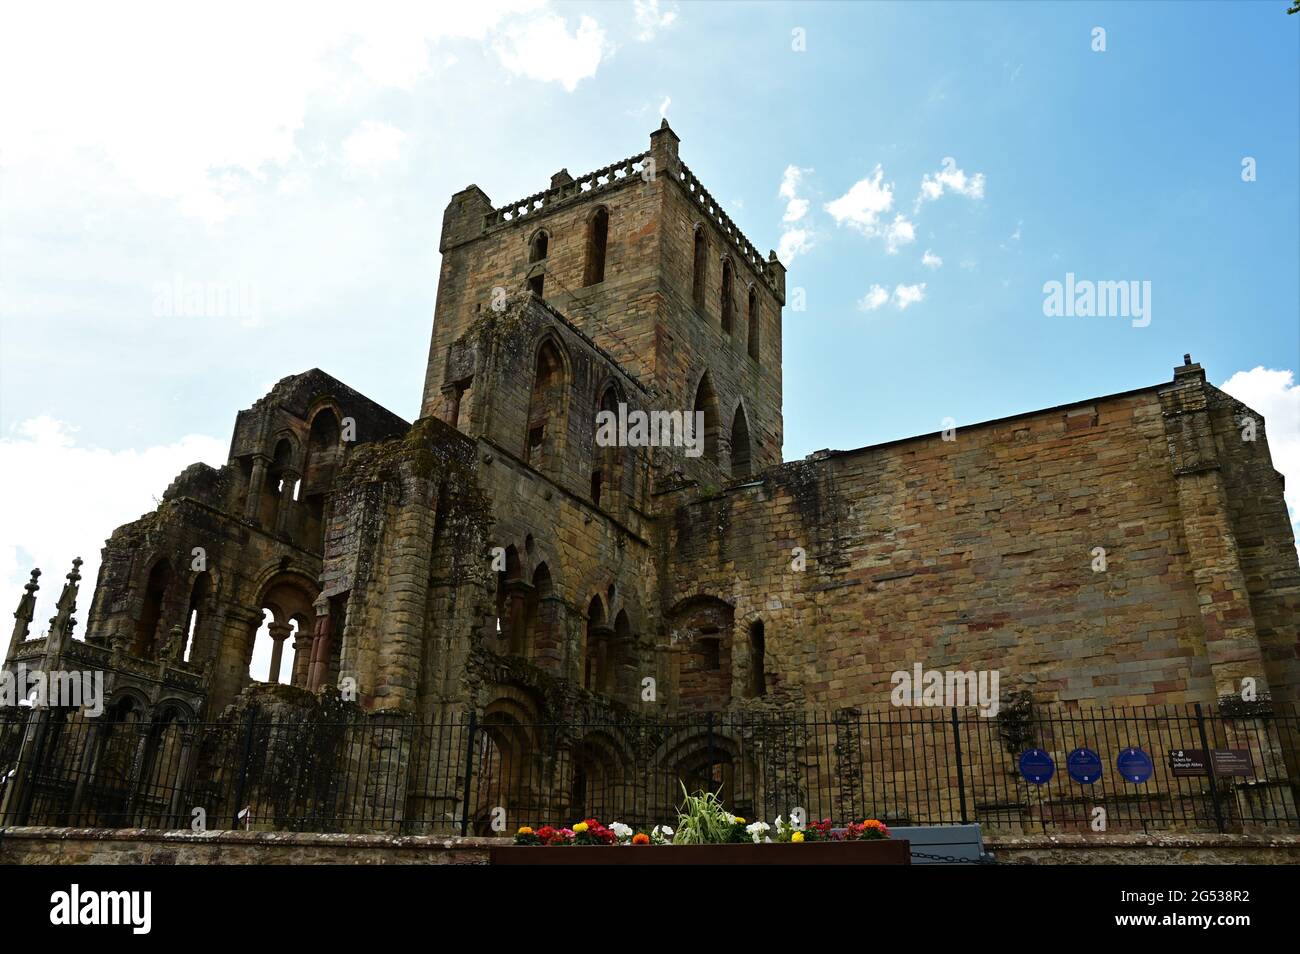 A view of the ruins of the medieval abbey complex at Jedburgh in the Scottish Borders. Stock Photo